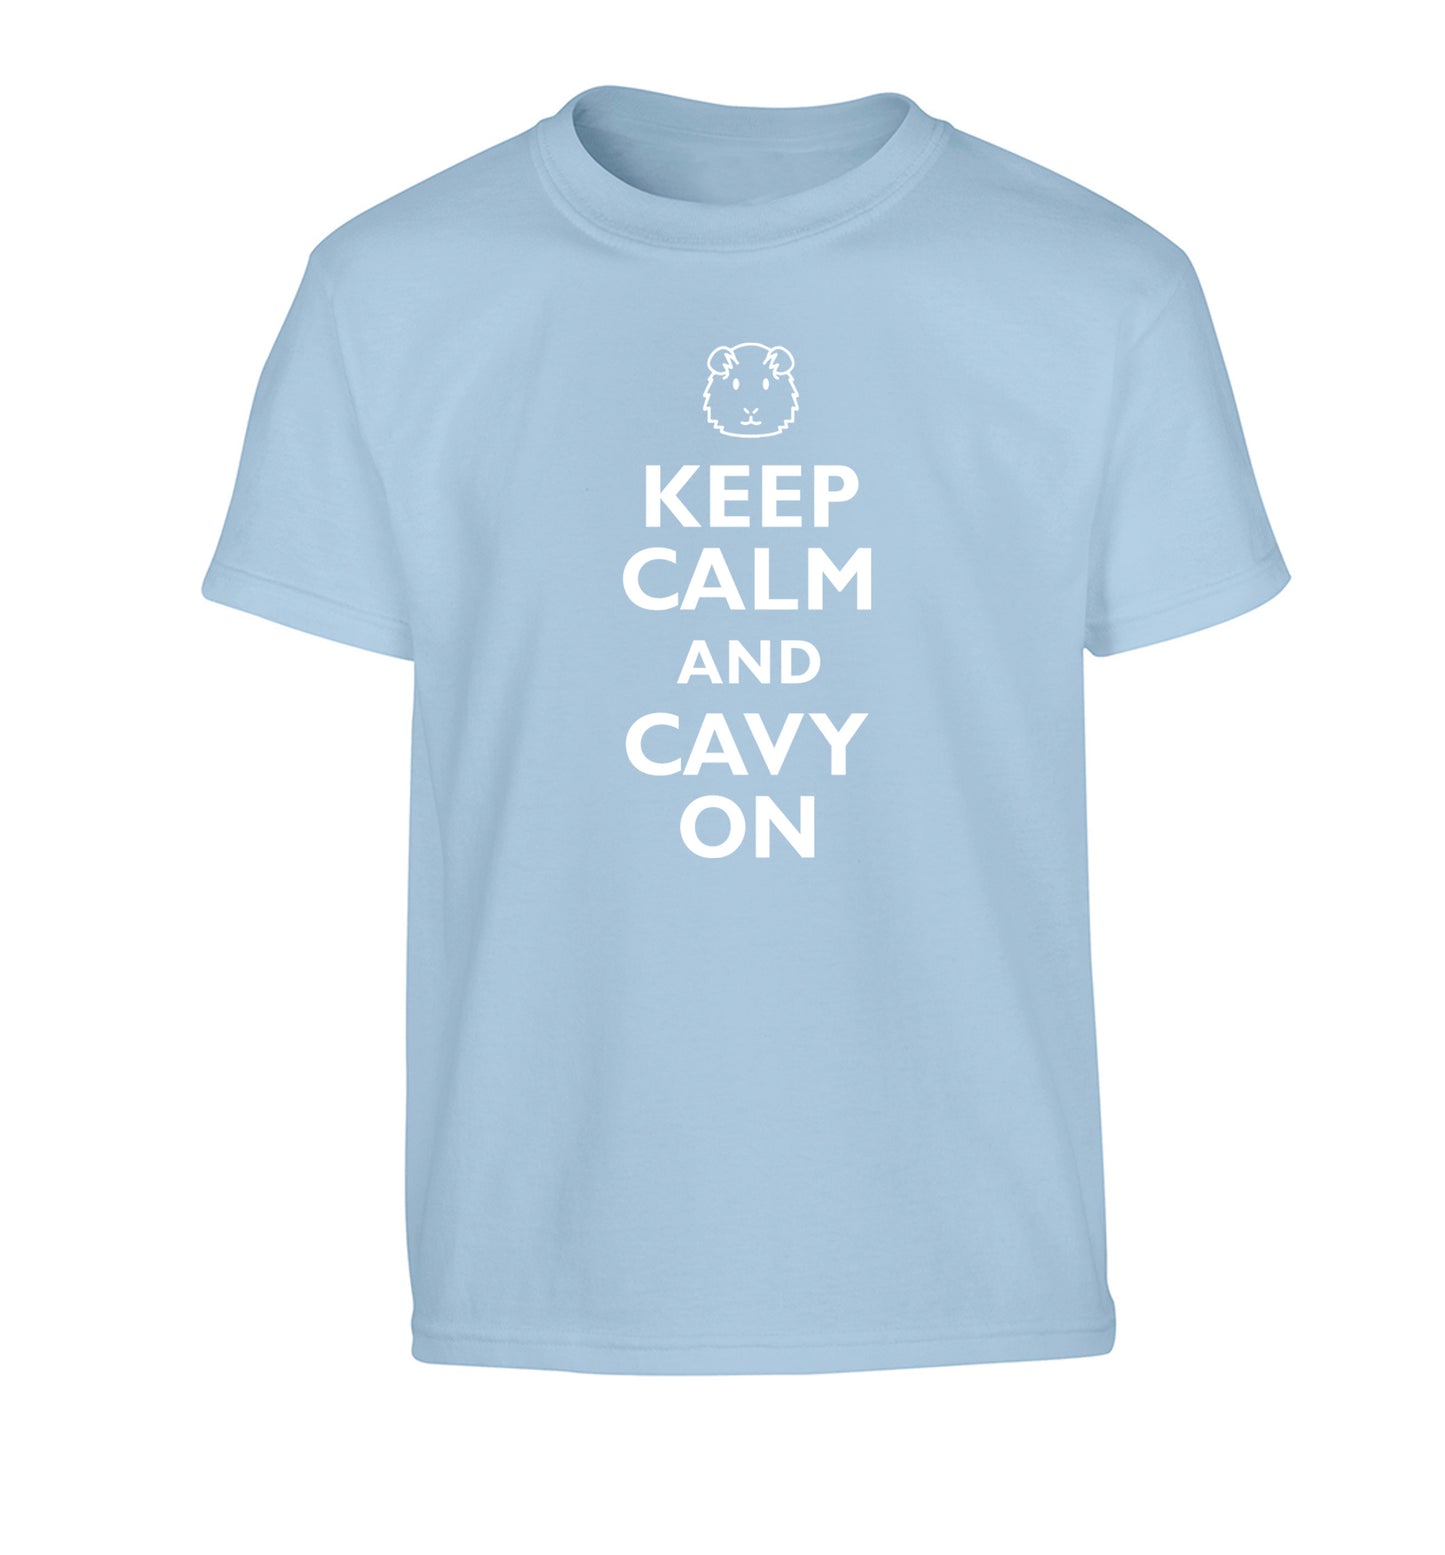 Keep calm and cavvy on Children's light blue Tshirt 12-14 Years